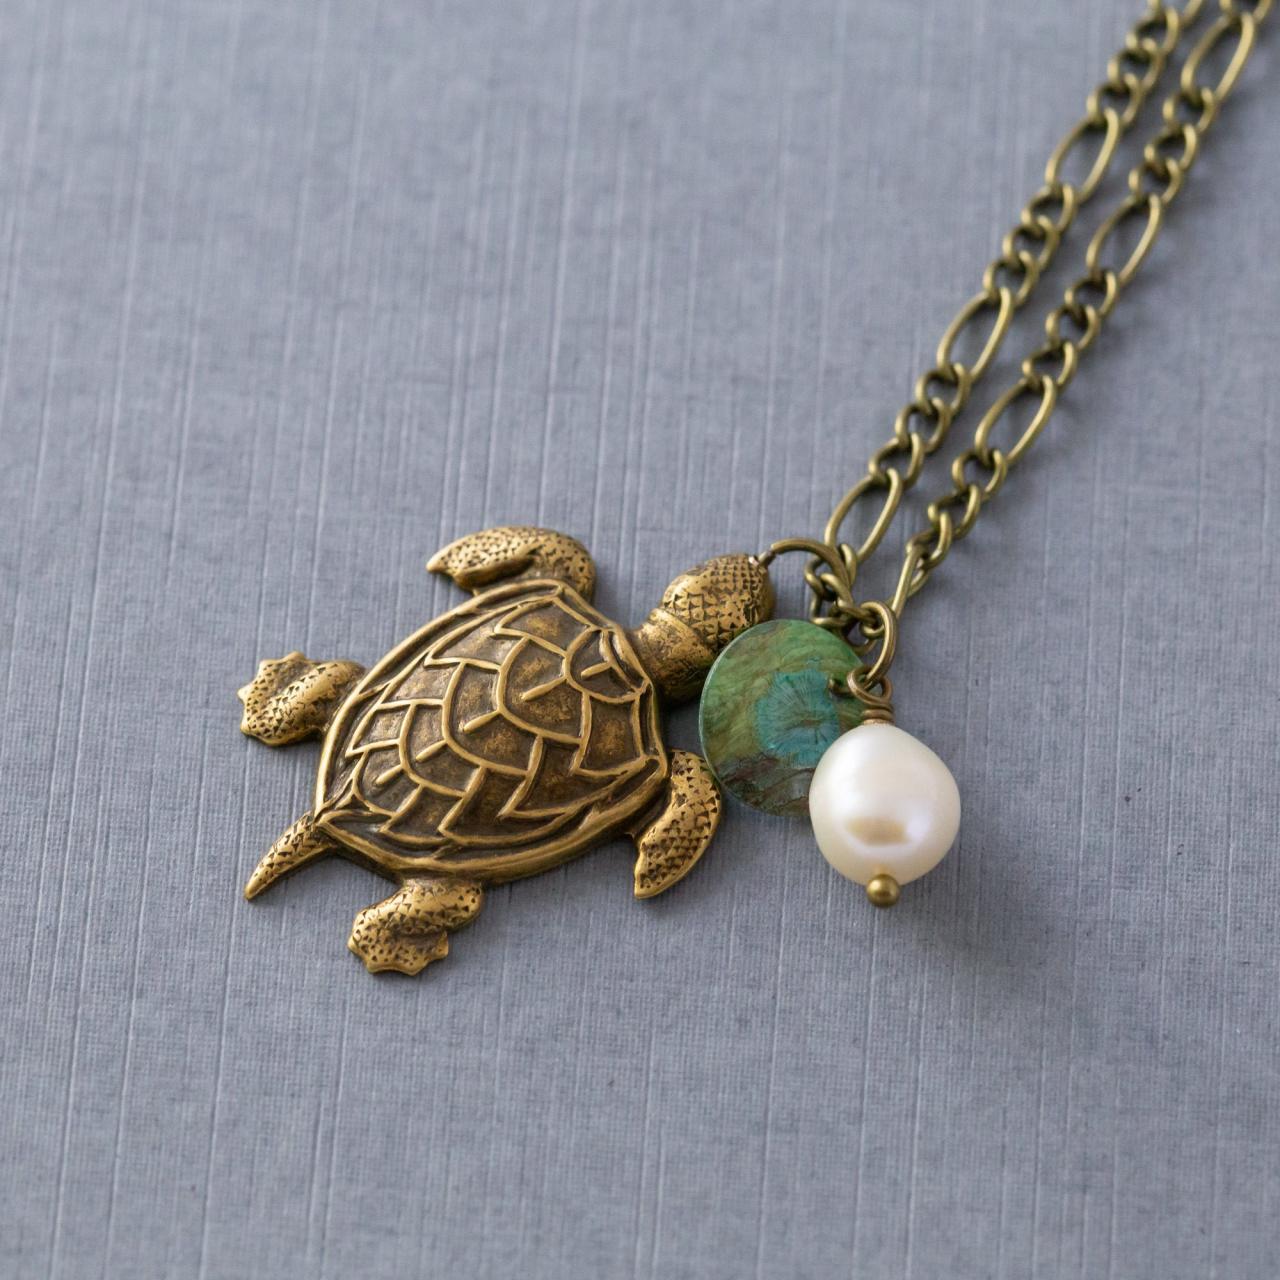 Sea Turtle Pendant Necklace, Freshwater Pearl Necklace, Beach Jewelry, Antiqued Brass Necklace, Beach Lover Gift, Sea Turtle Jewelry